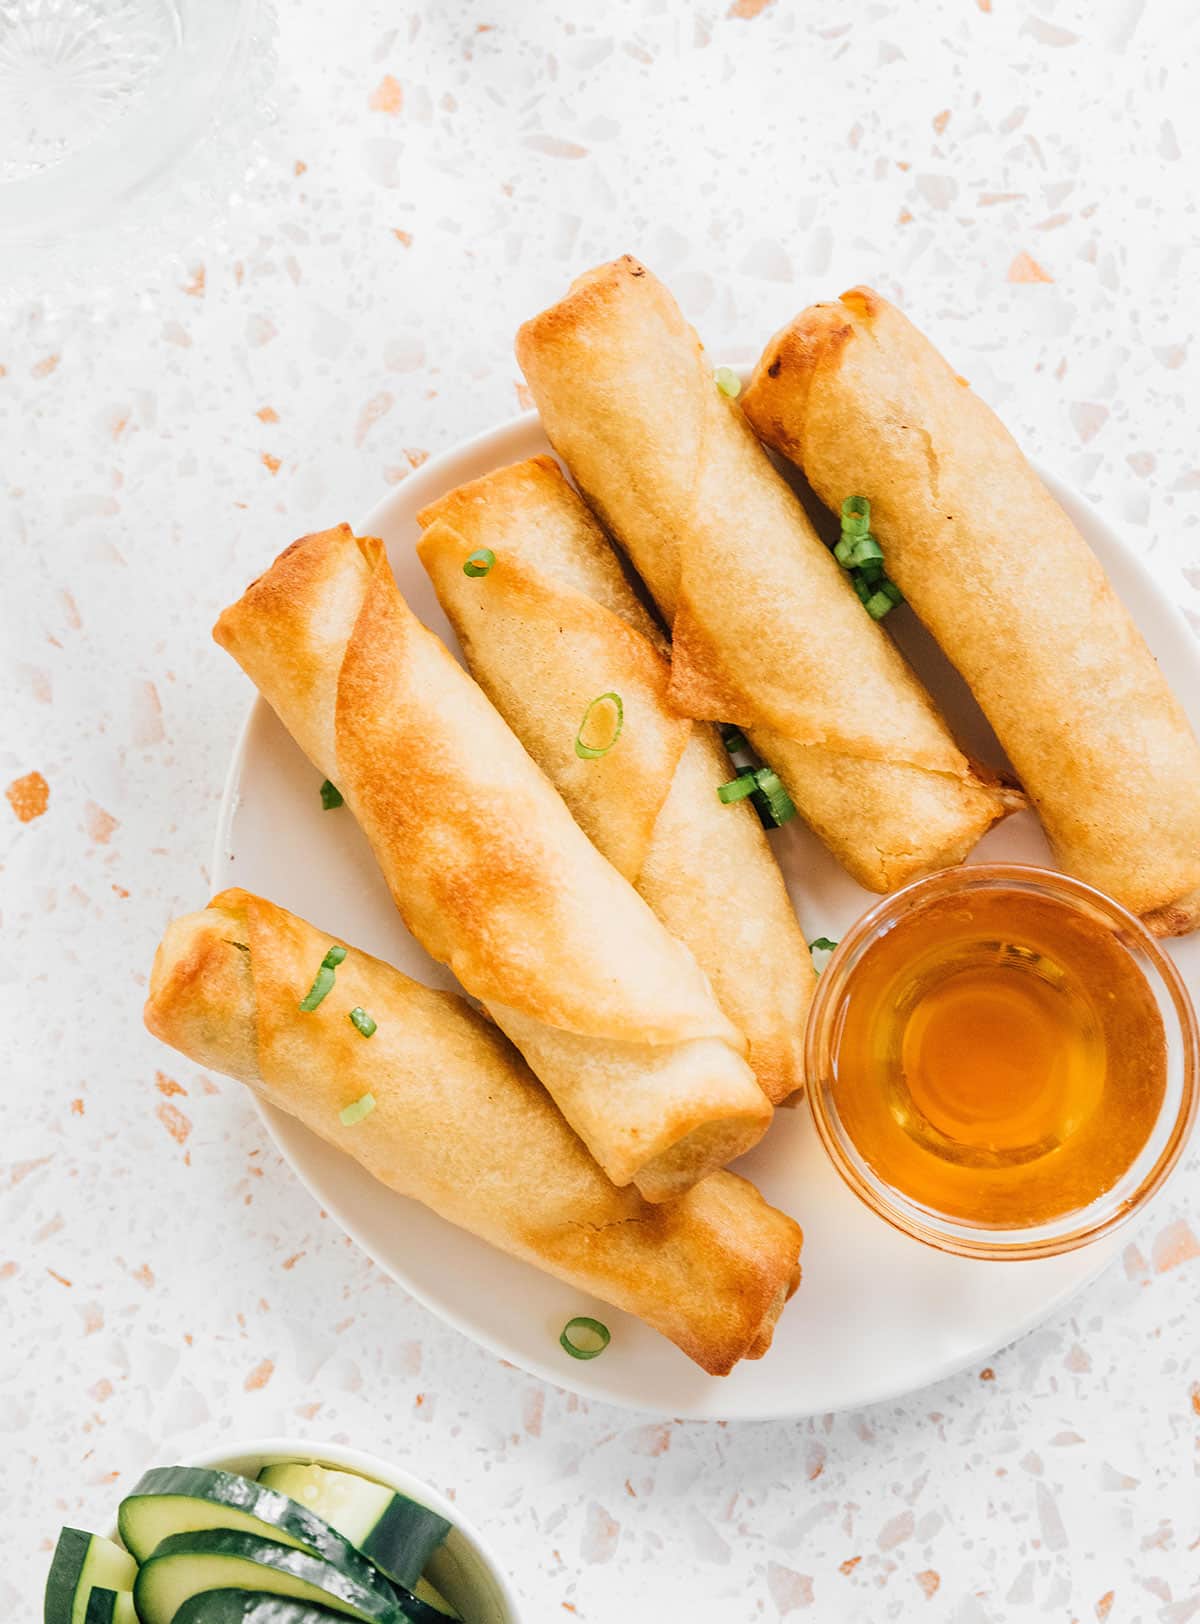 Fried frozen spring rolls on a plate with a dipping sauce on the side.